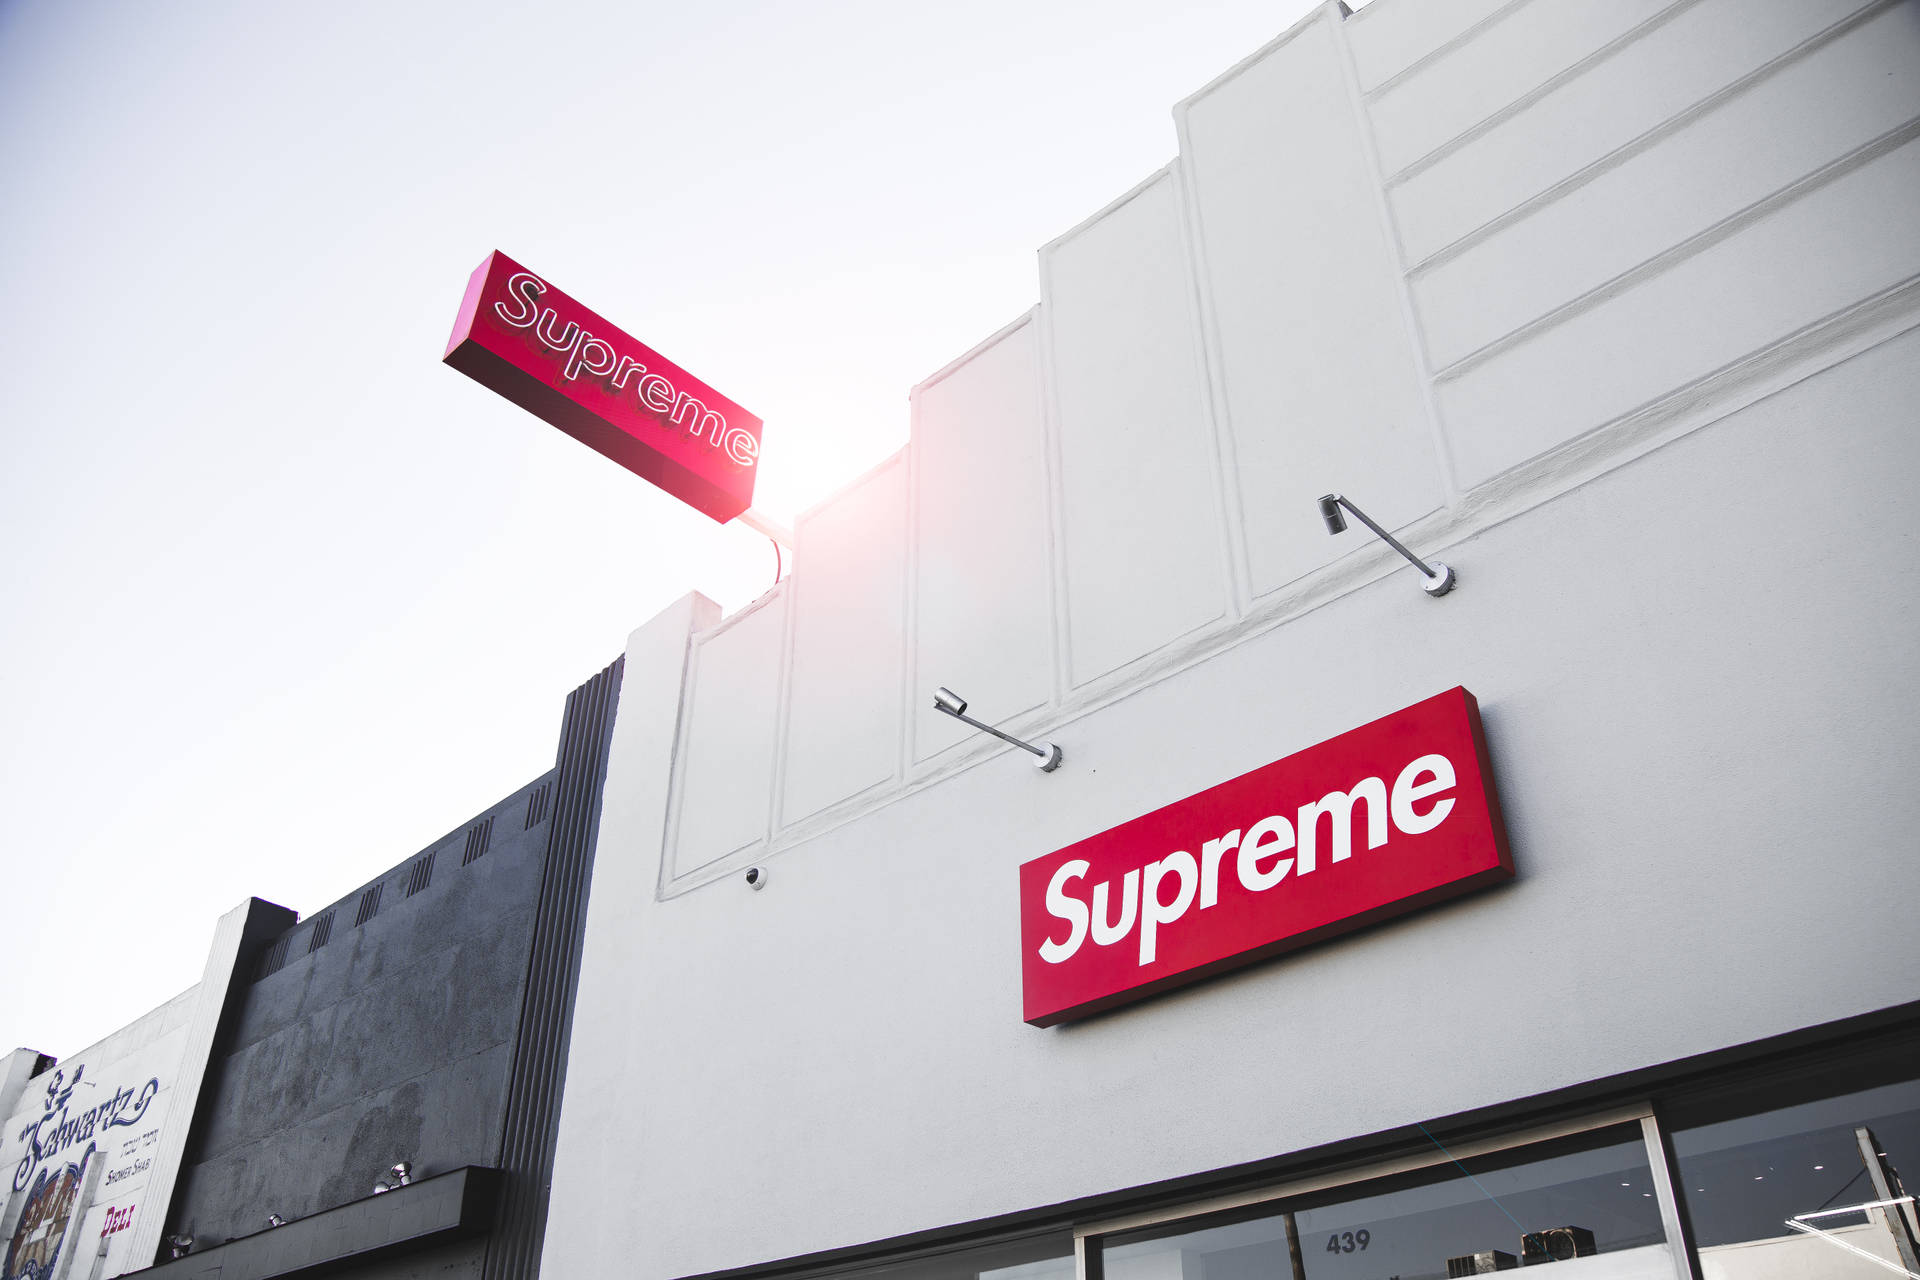 Supreme 5760X3840 Wallpaper and Background Image